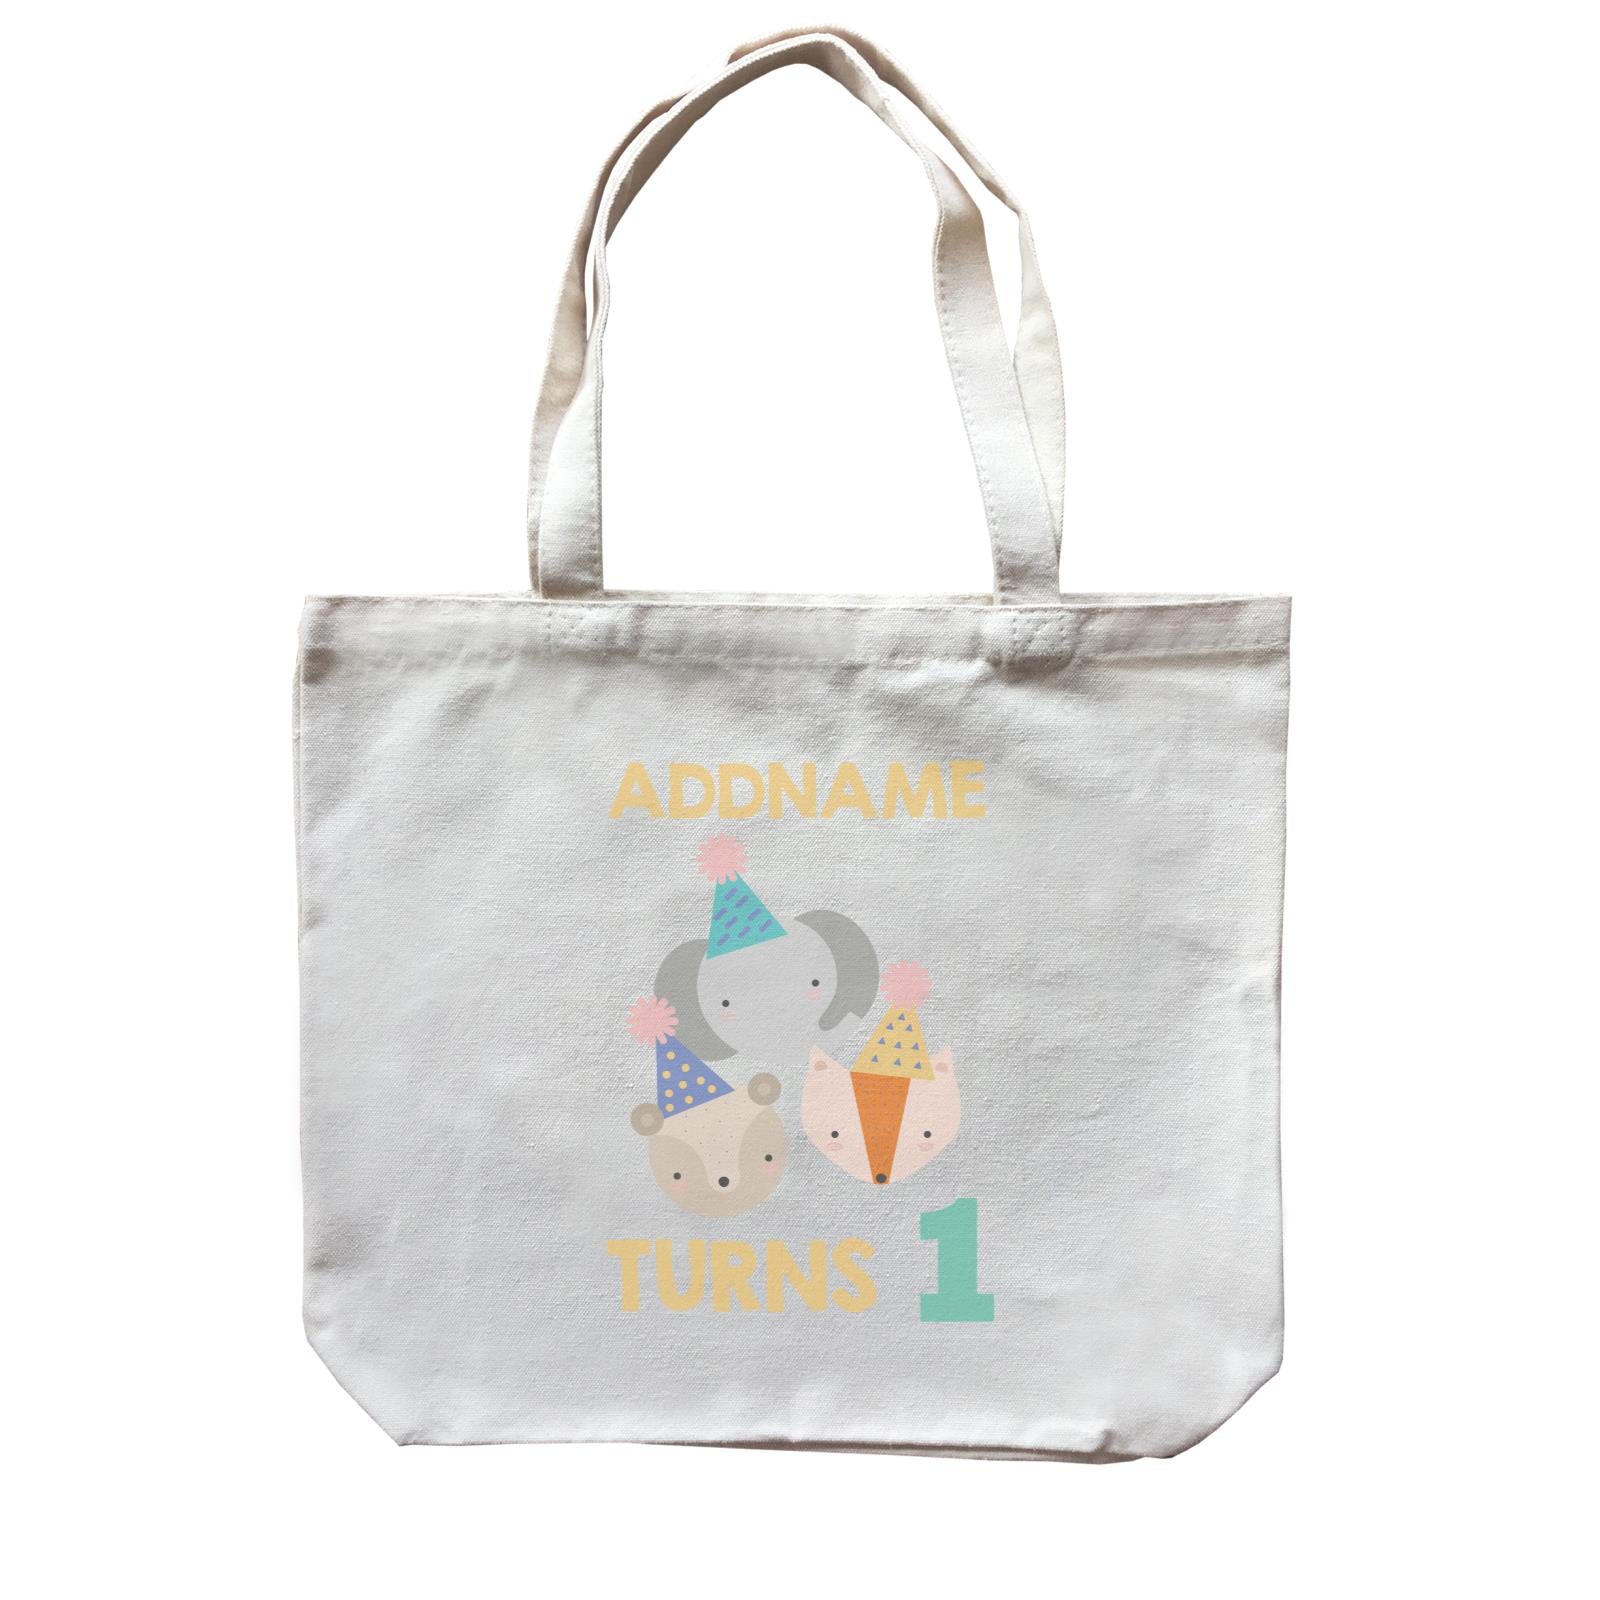 Cute It's My Birthday Safari Theme Personalizable with Name and Number Canvas Bag